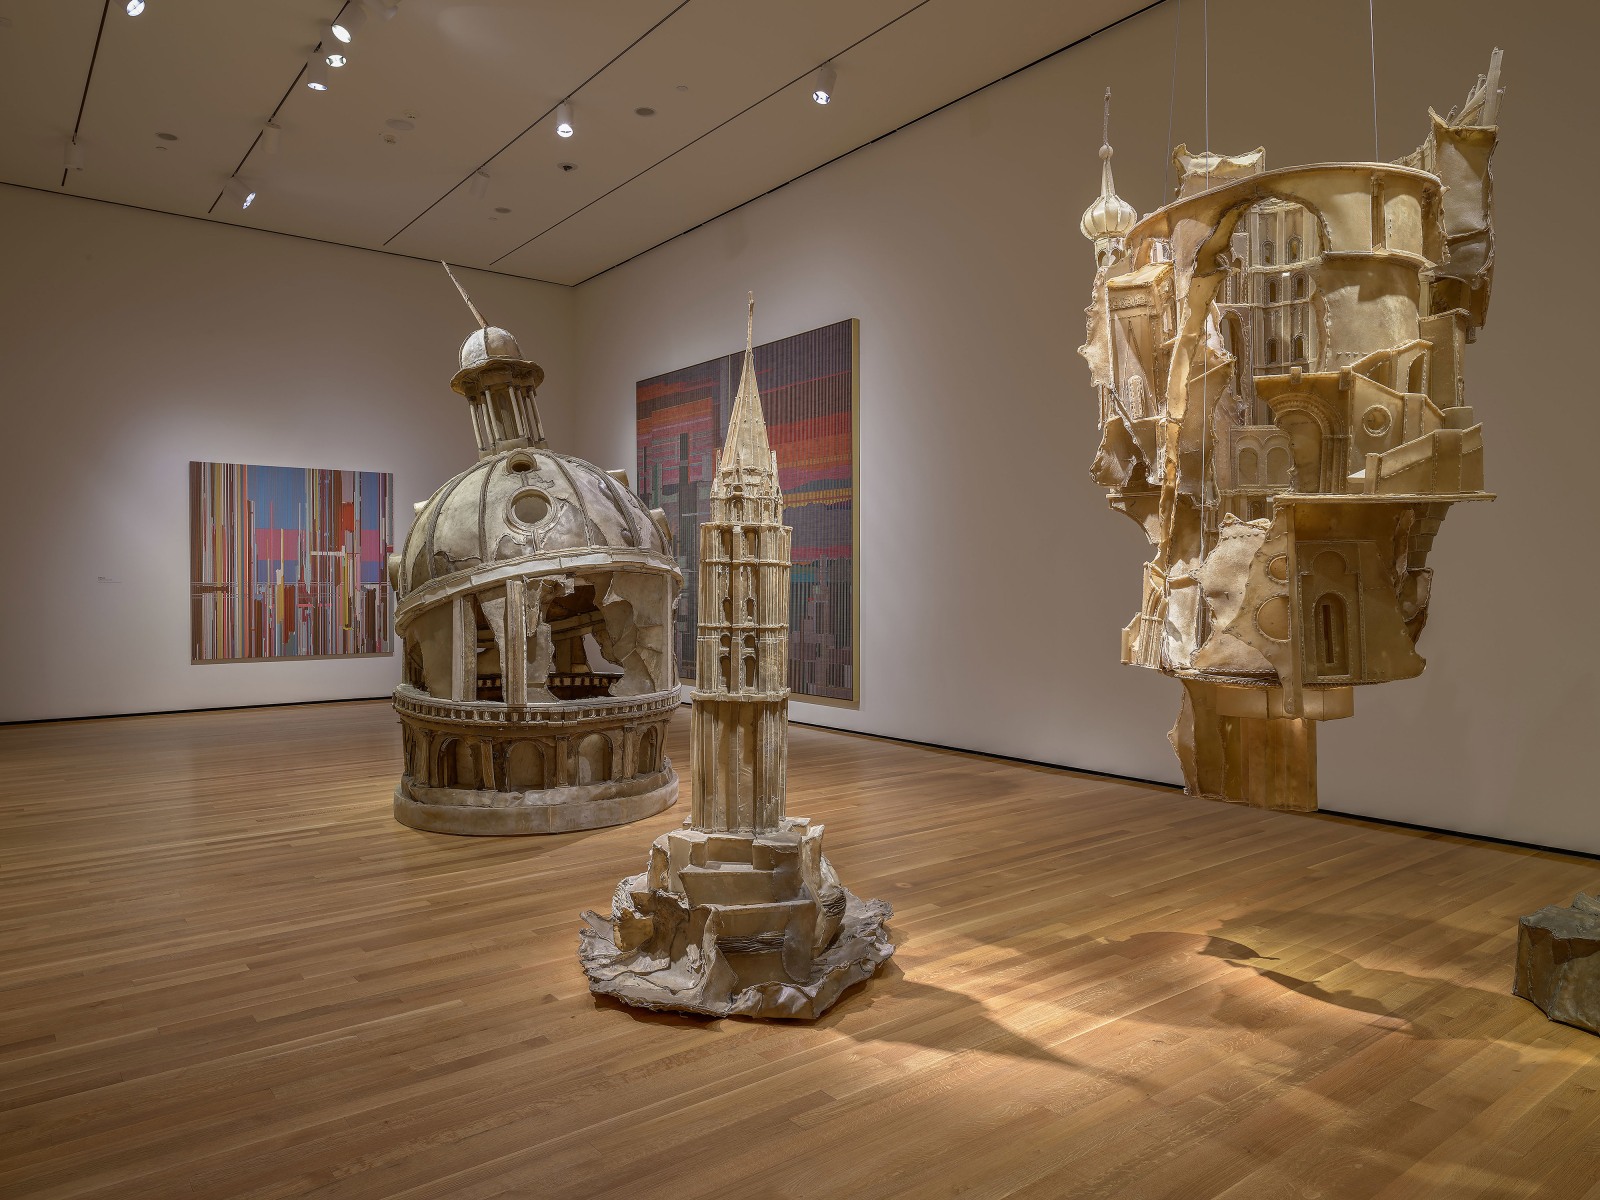 View 4 of Liu Wei's solo museum exhibition titled Invisible Cities at the Cleveland Museum of Art